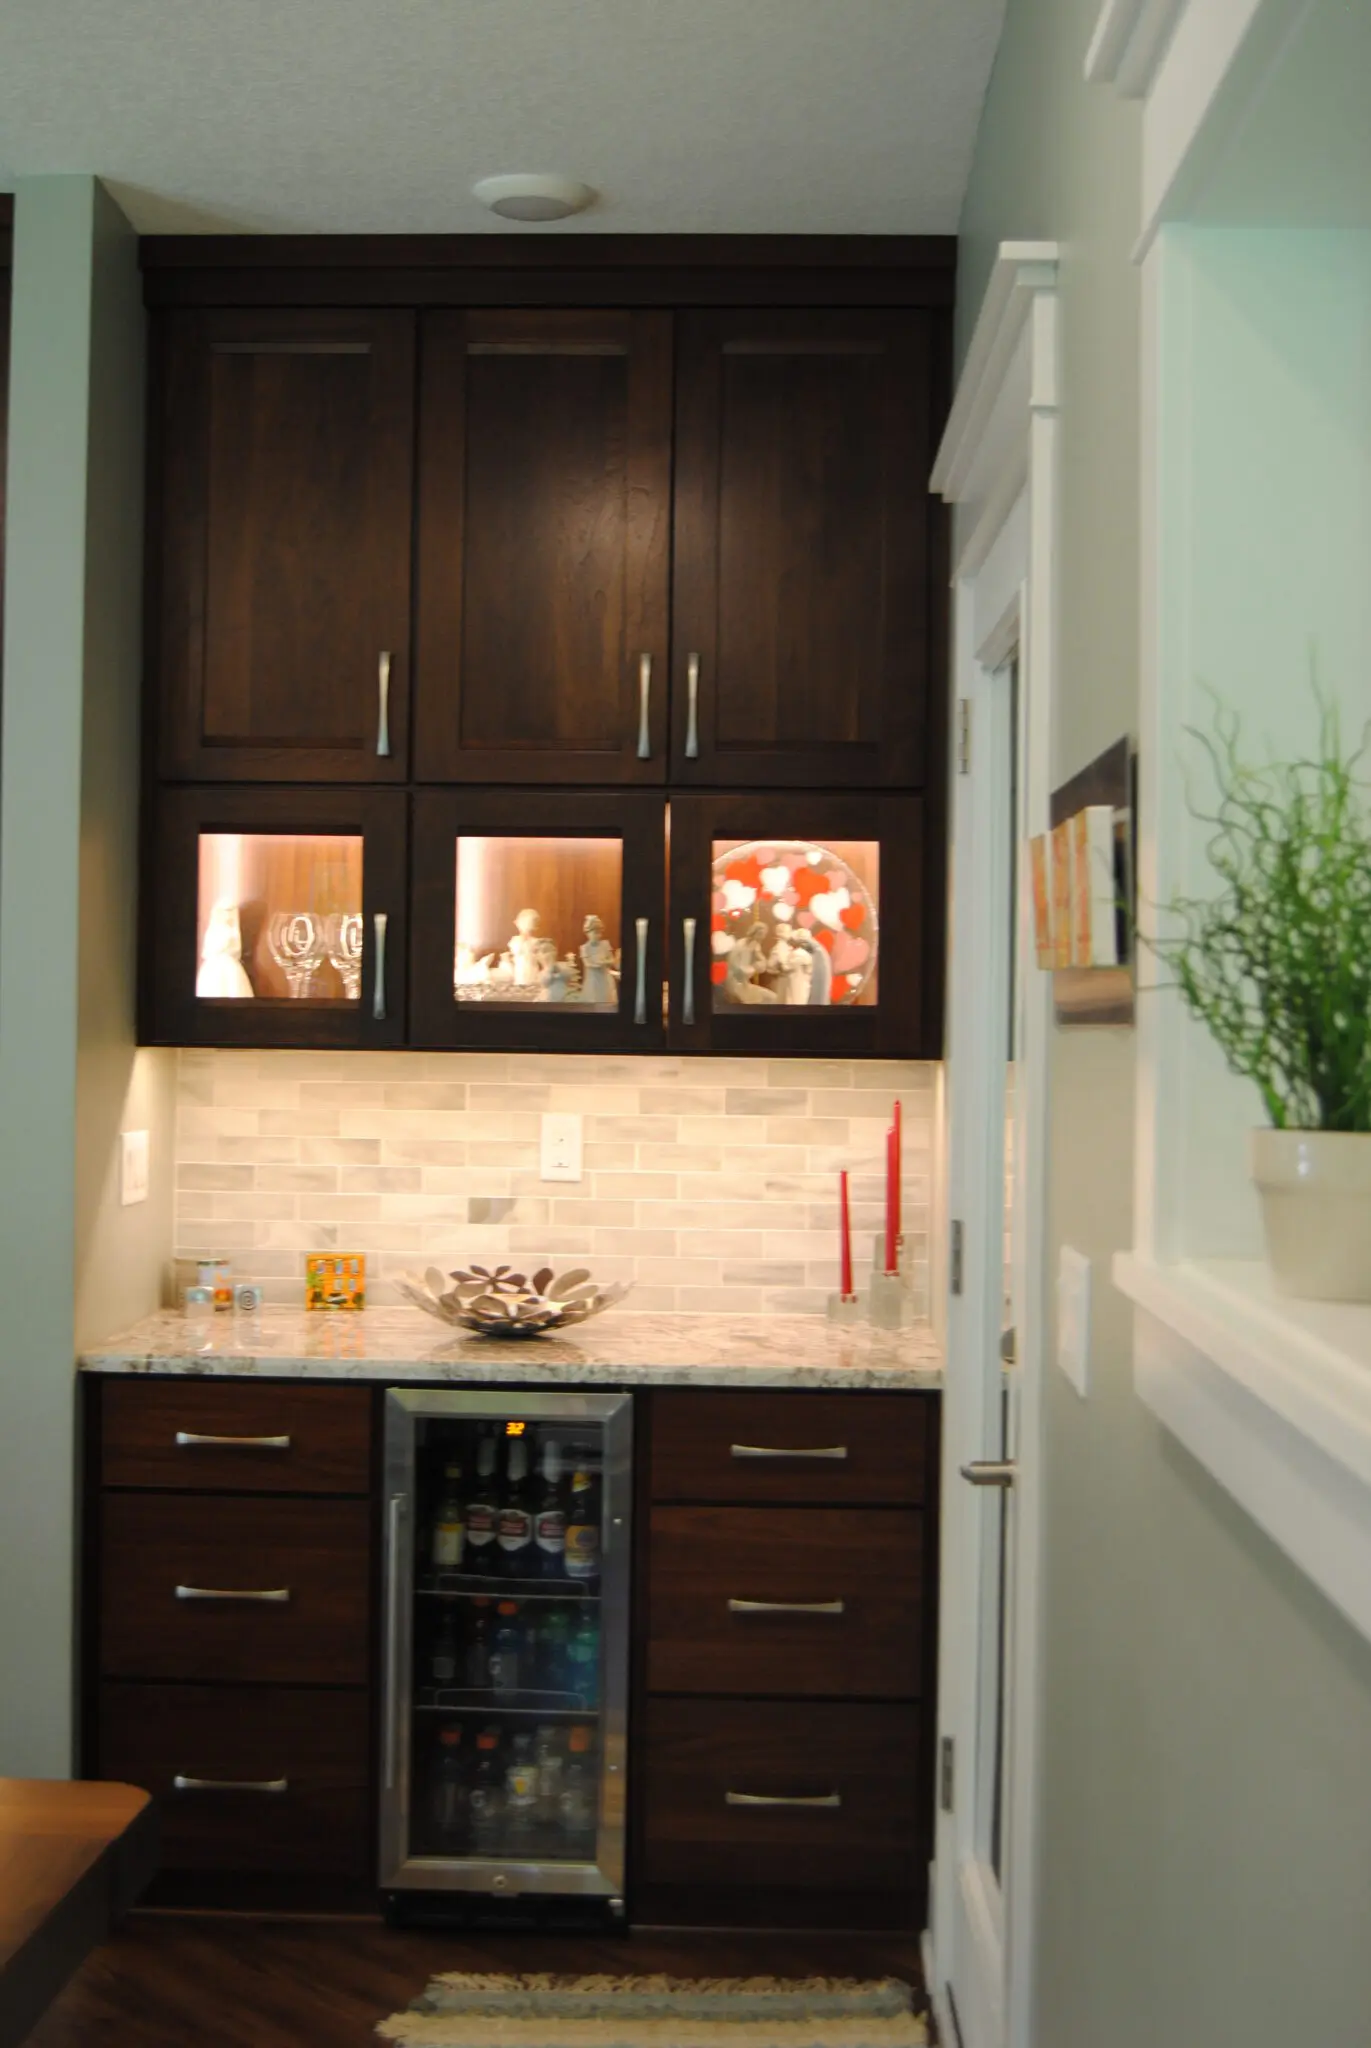 Kitchen cabinets with transitional effect interior